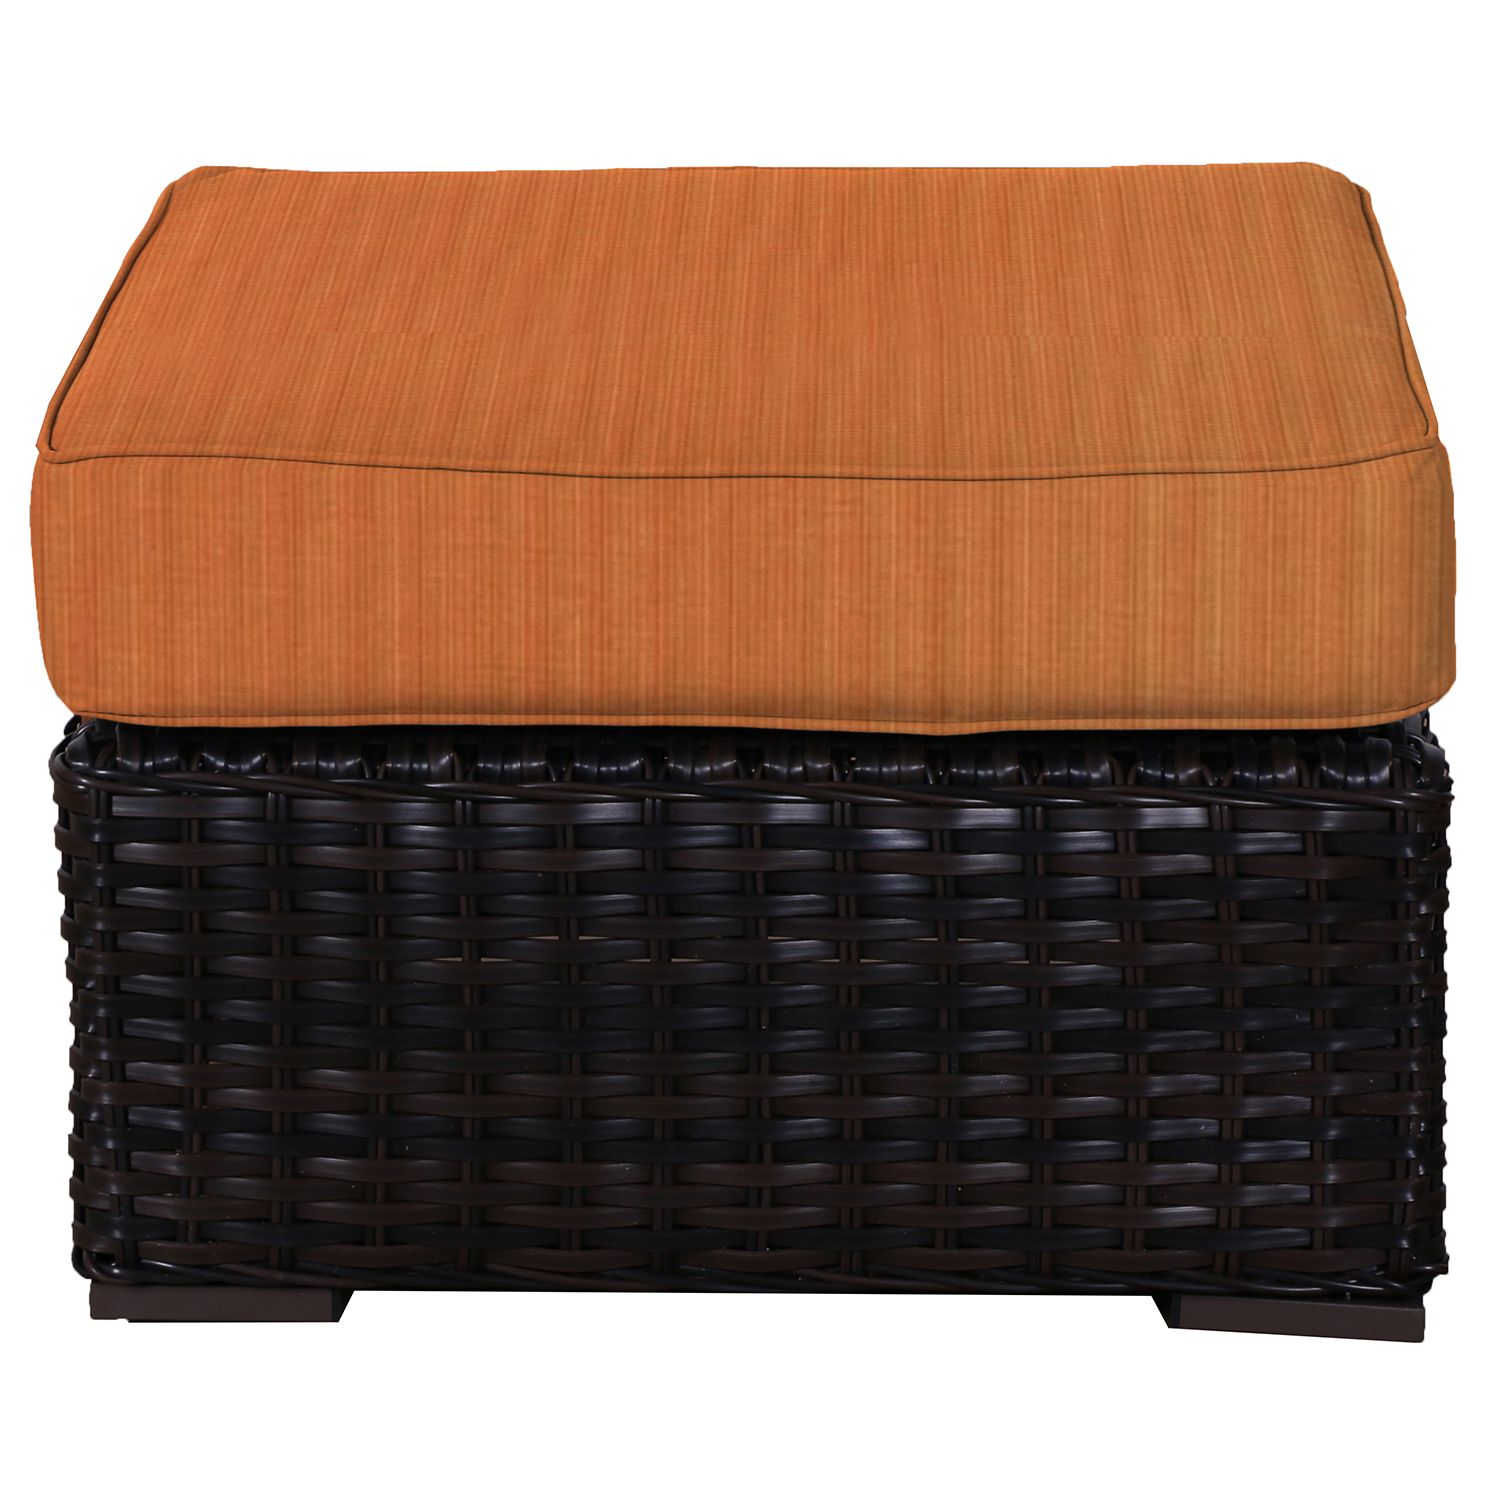 Santa Monica Outdoor Wicker Rattan Ottoman Includes Sunbrella Cushions With Well Liked Woven Pouf Ottomans (View 4 of 10)